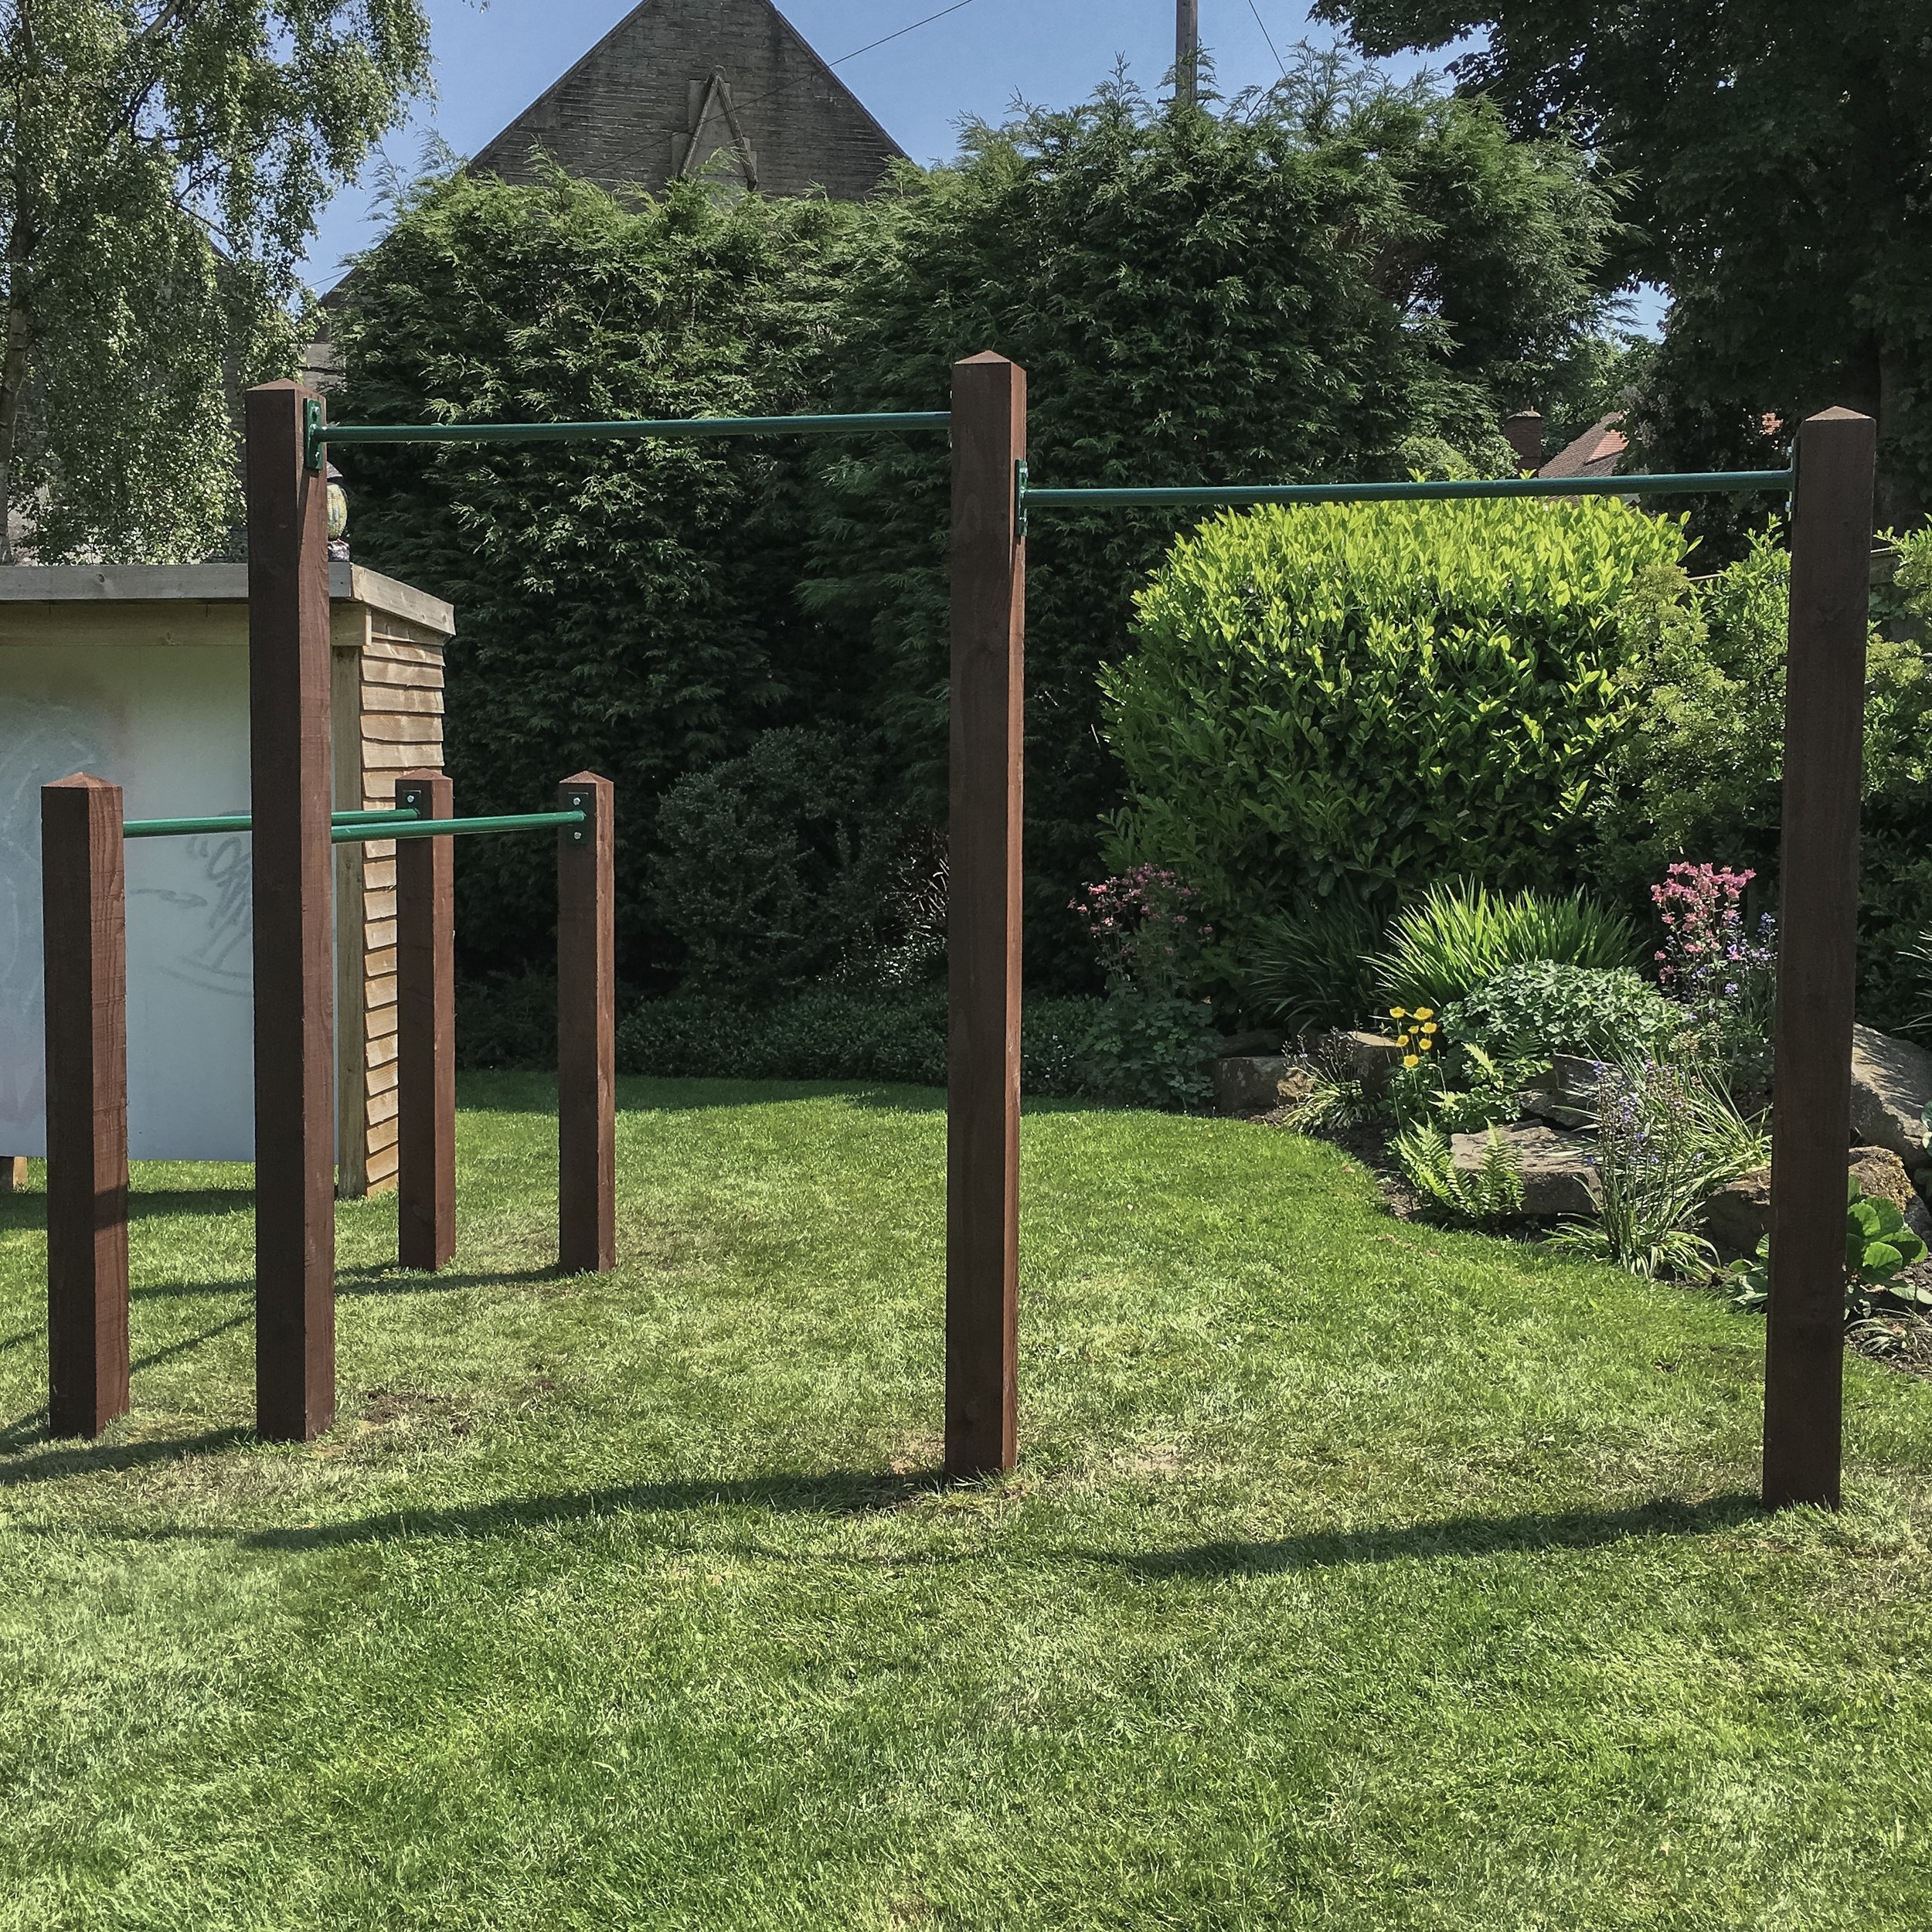 033 2016 garden double pull up bar and dip bars installation.JPG